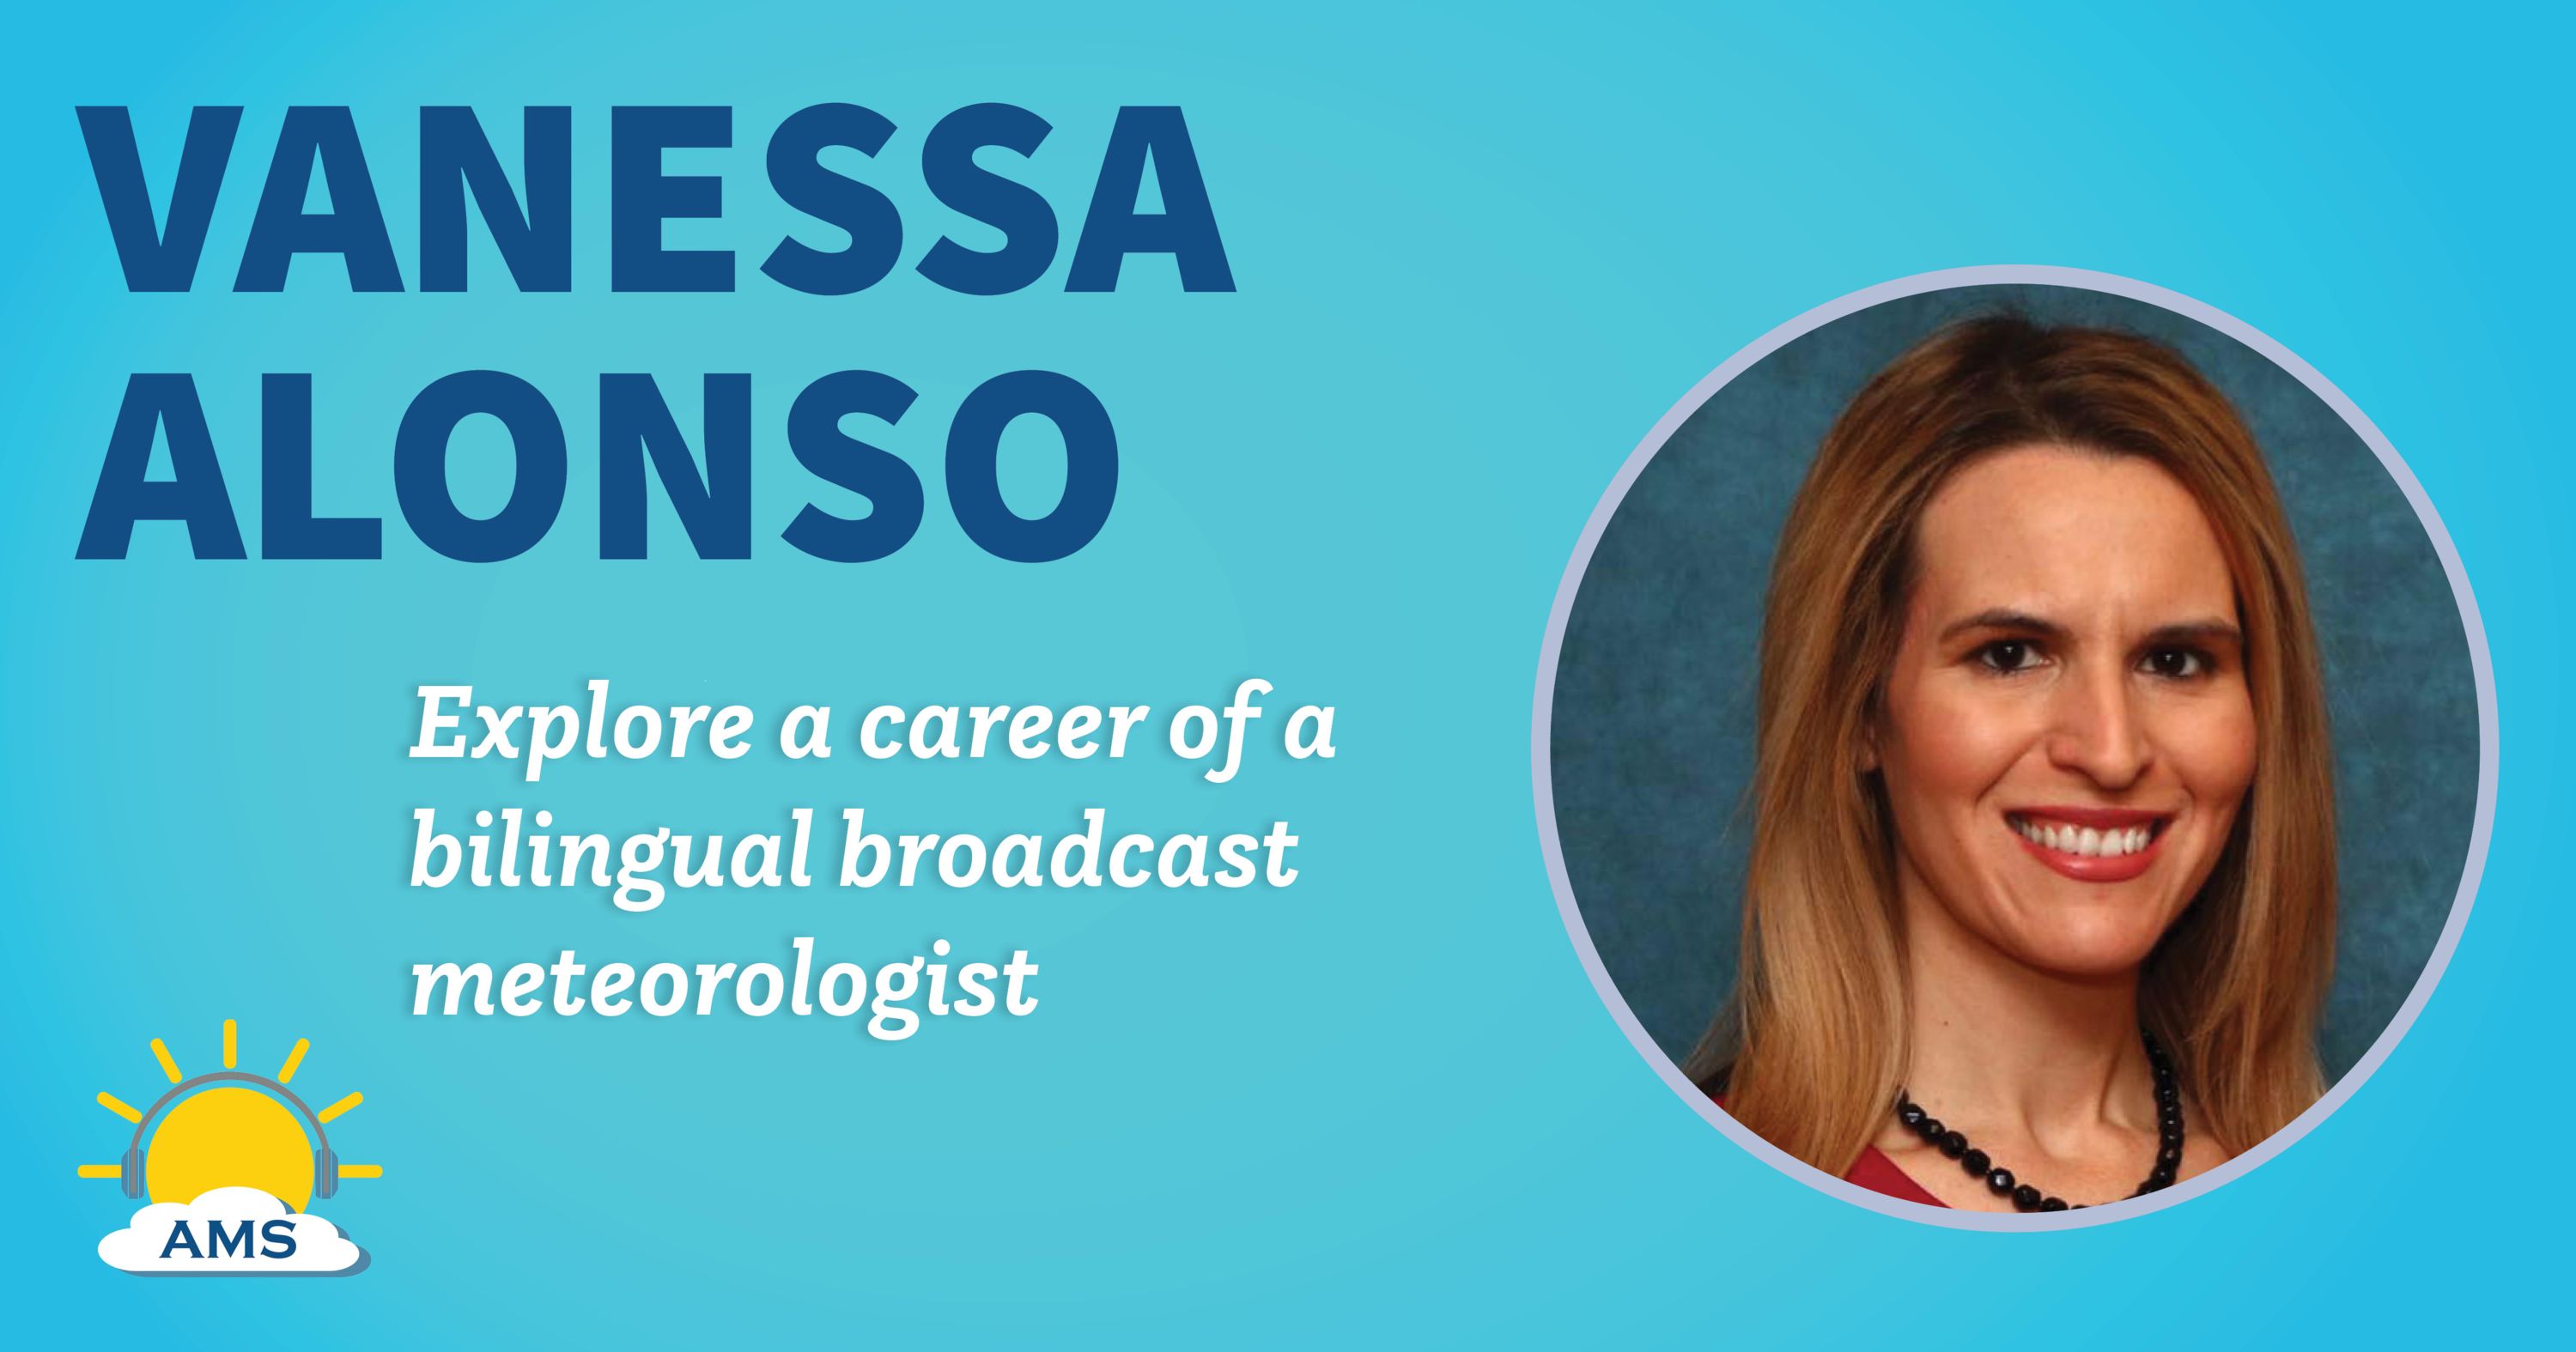 vanessa alonso headshot graphic with teaser texts that reads &quotexplore the career of a bilingual broadcast meteorologist"